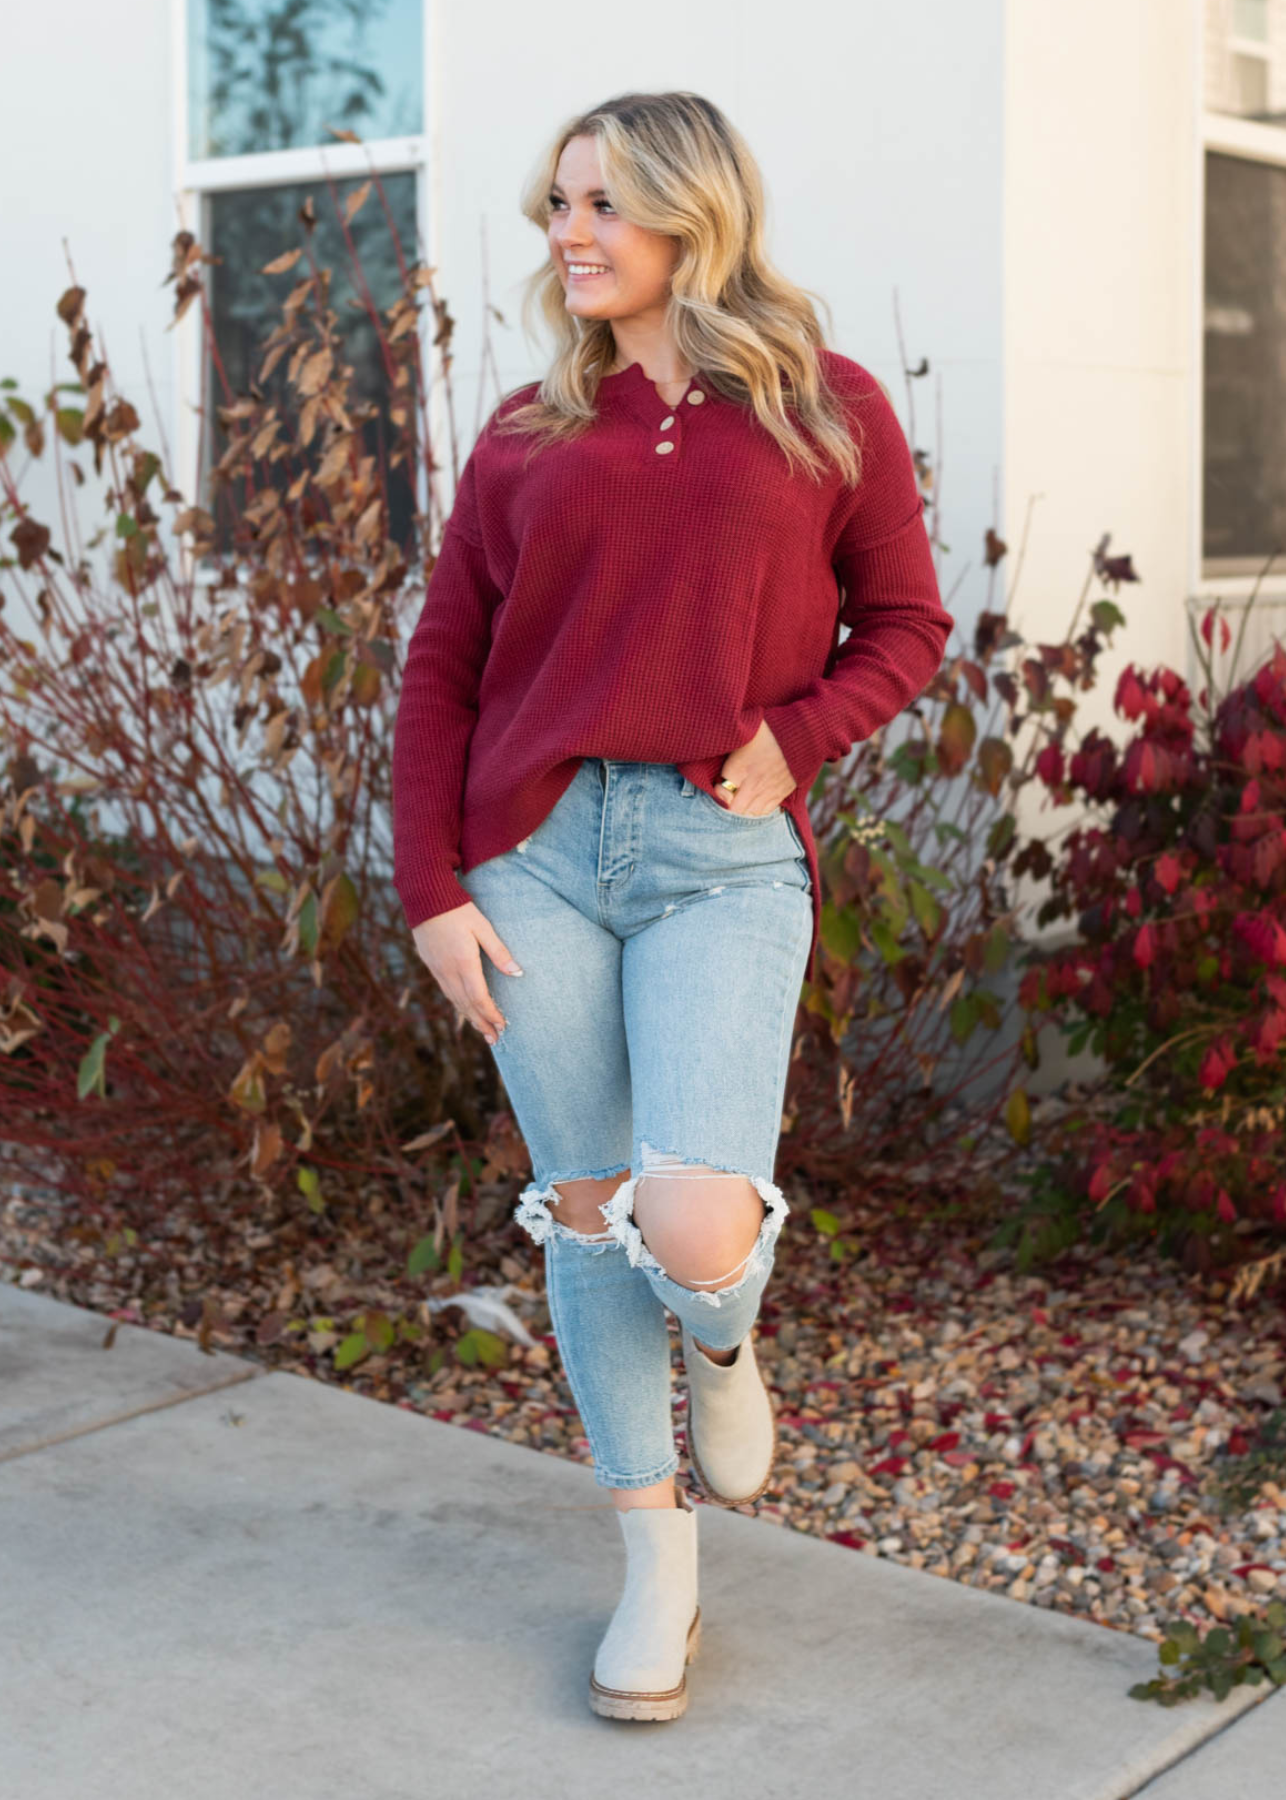 Long sleeve burgundy sweater with buttons at the neck